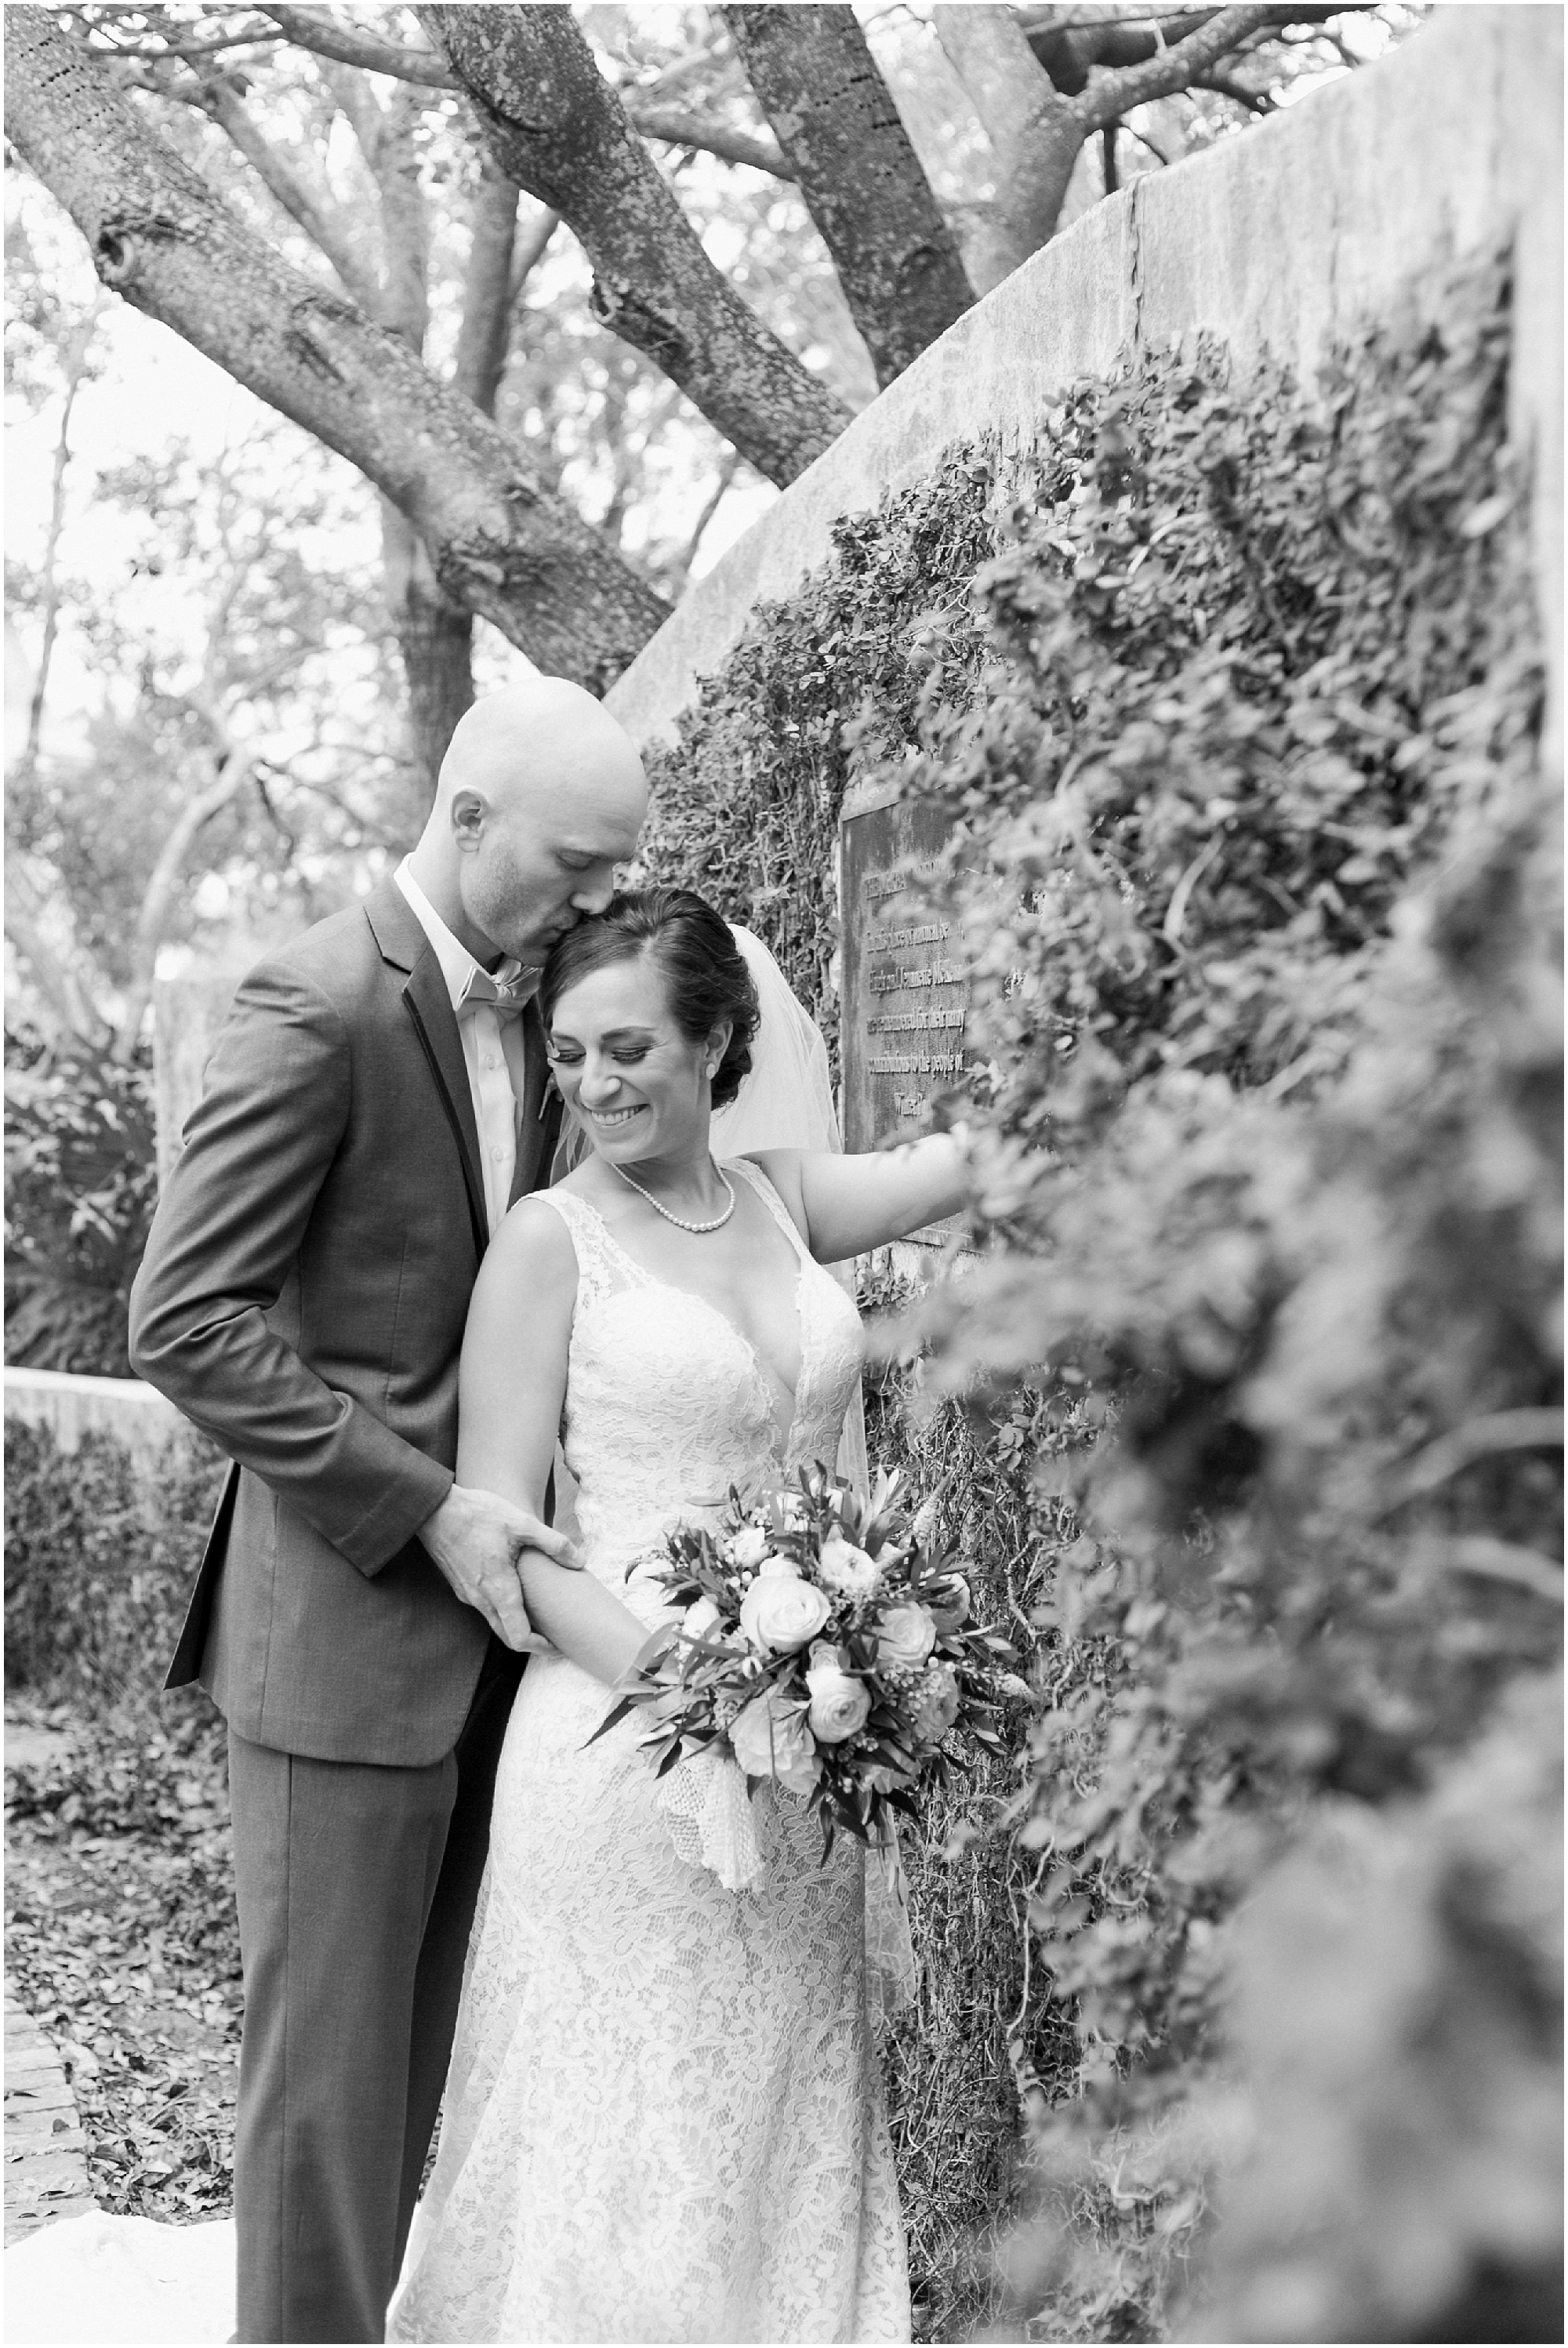 Black and white photo of the bride and groom taking photos next to a wall covered in vines.